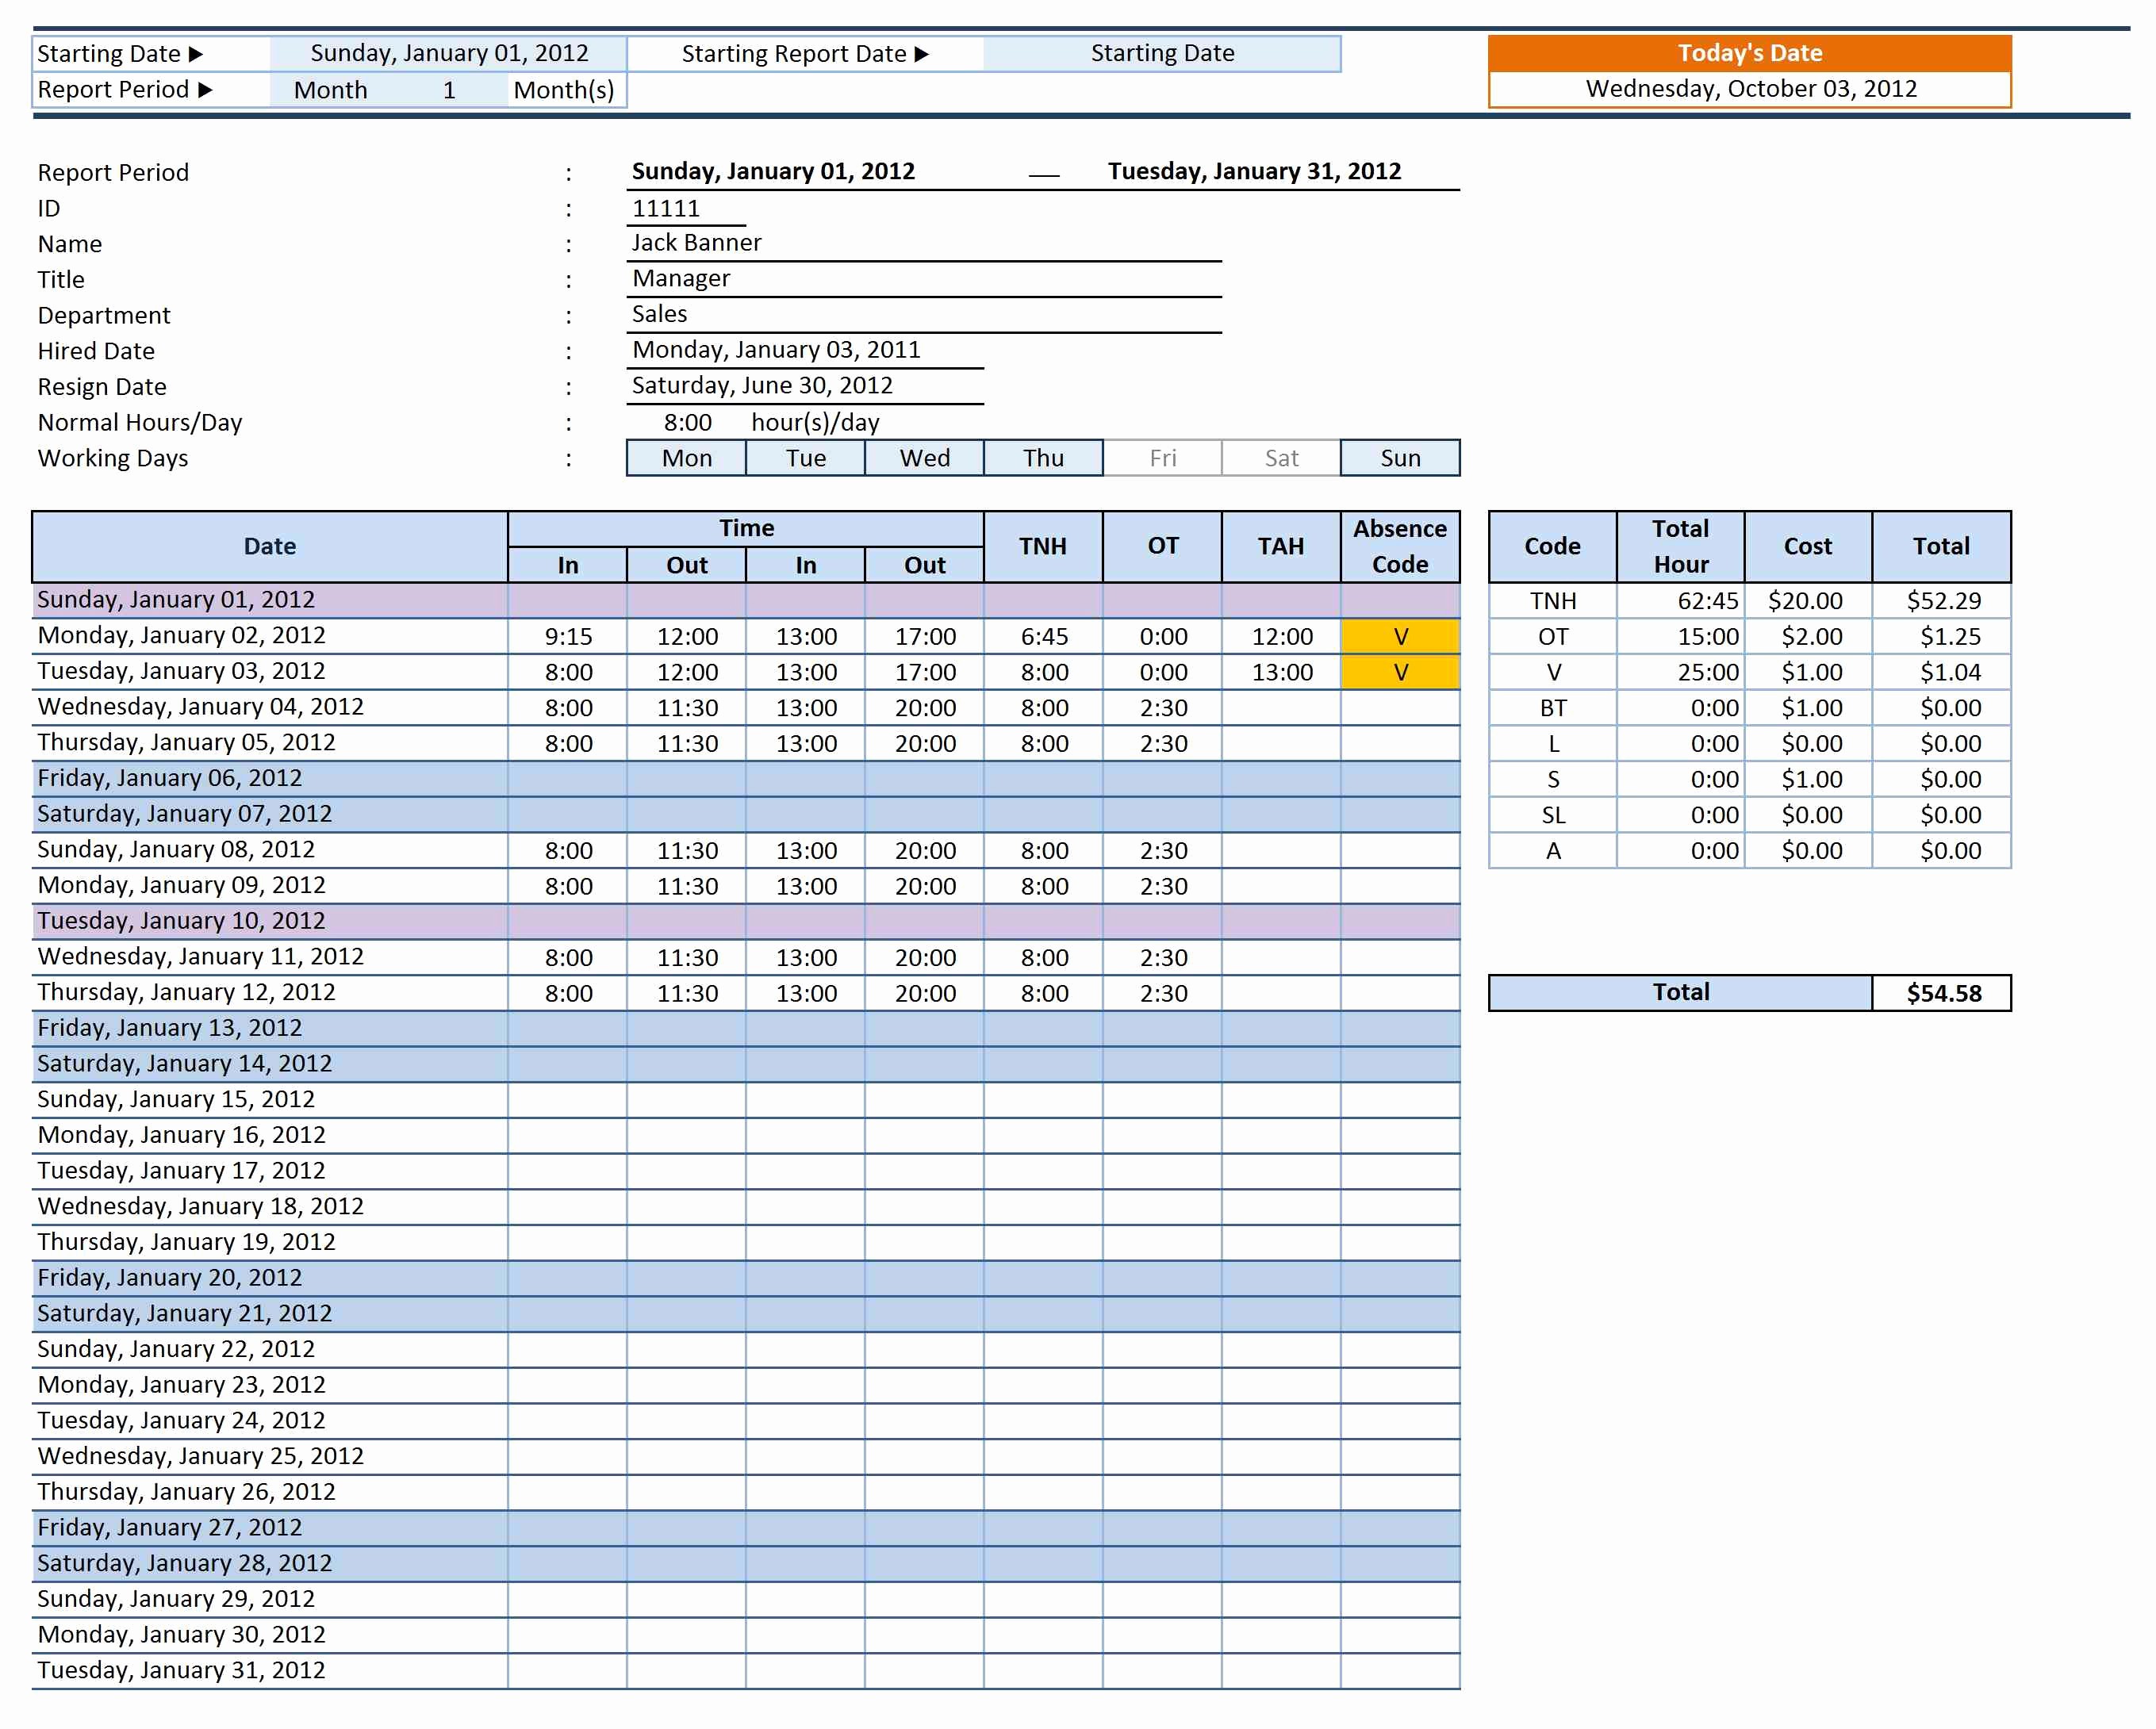 Fmla Intermittent Leave Tracking Form Lovely Time Document